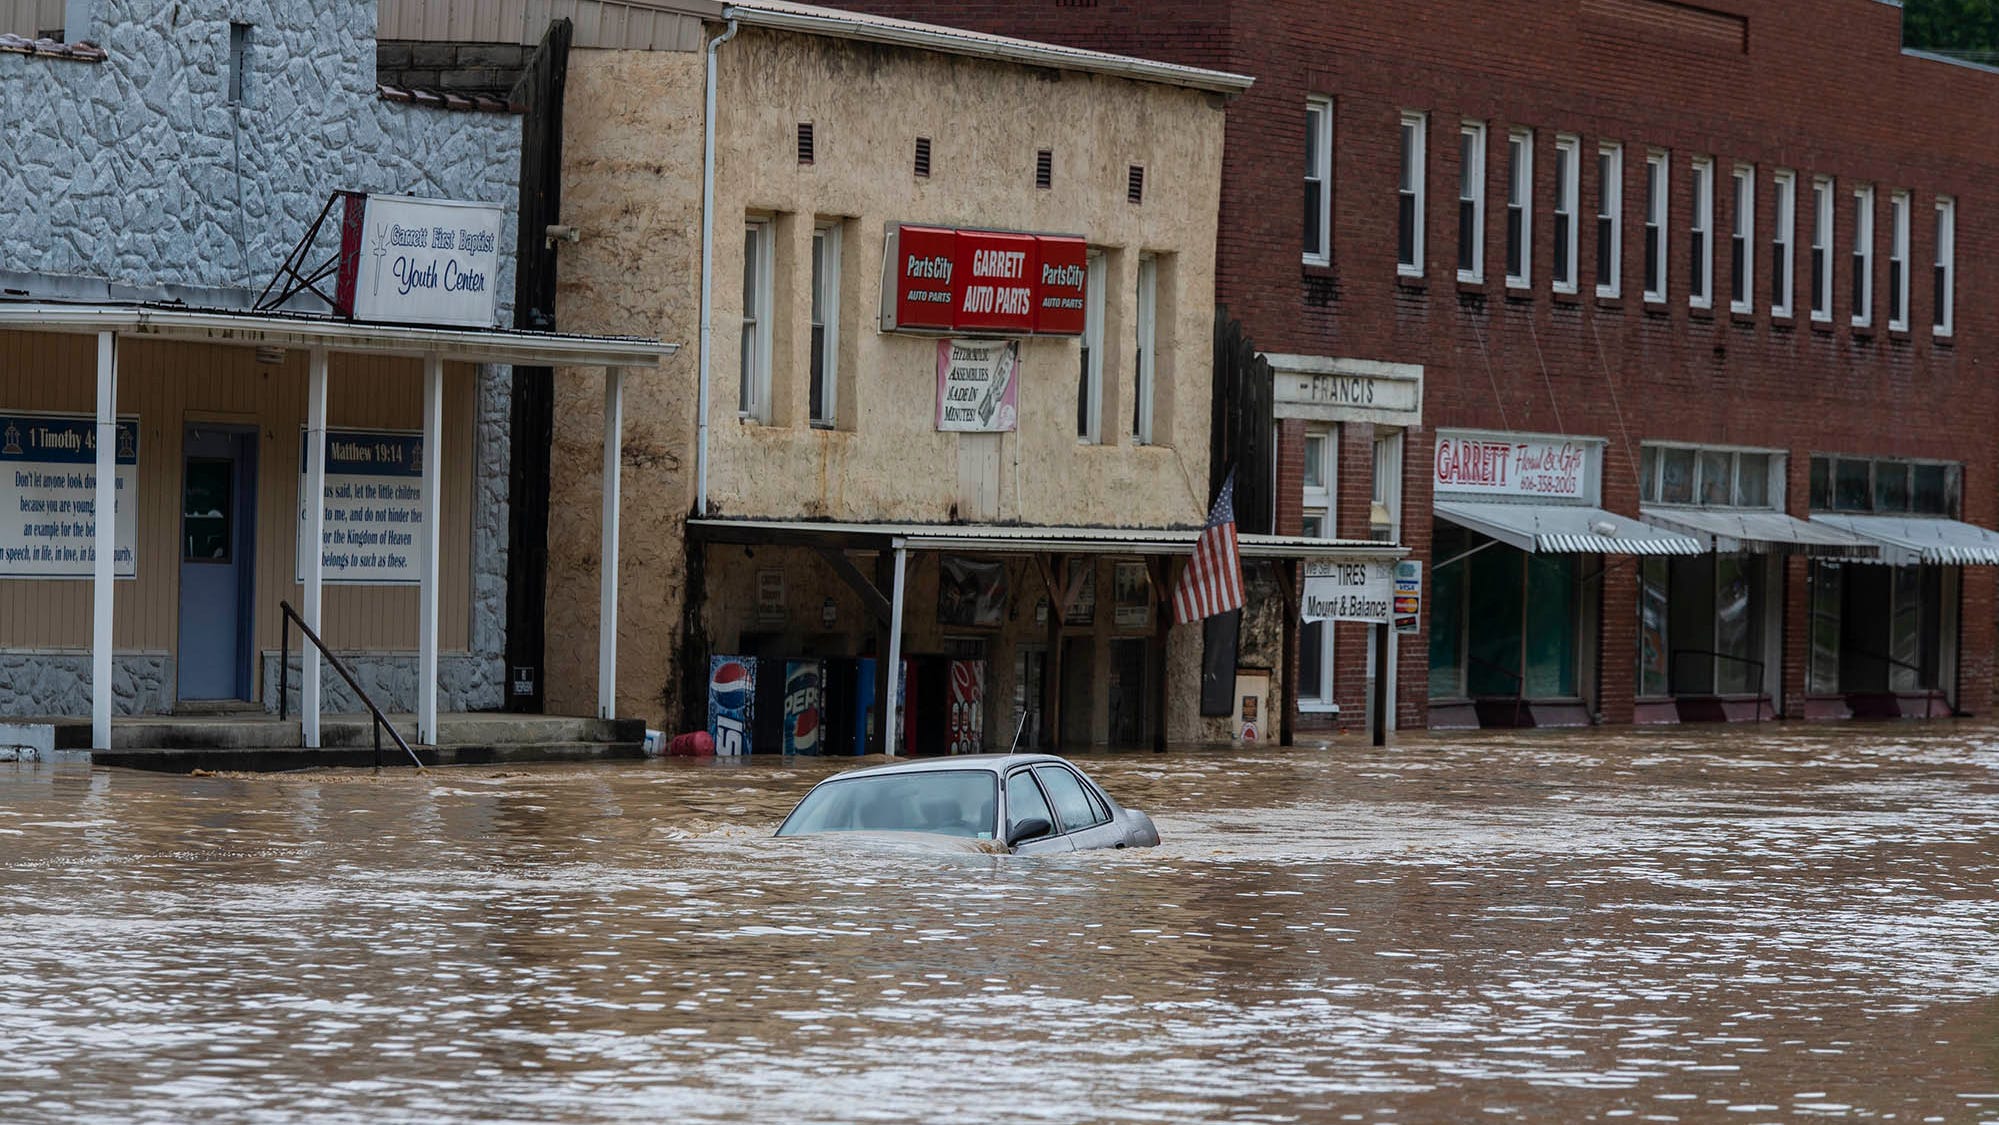 'Not seen the worst of it': At least 8 dead, more missing in eastern Kentucky flooding